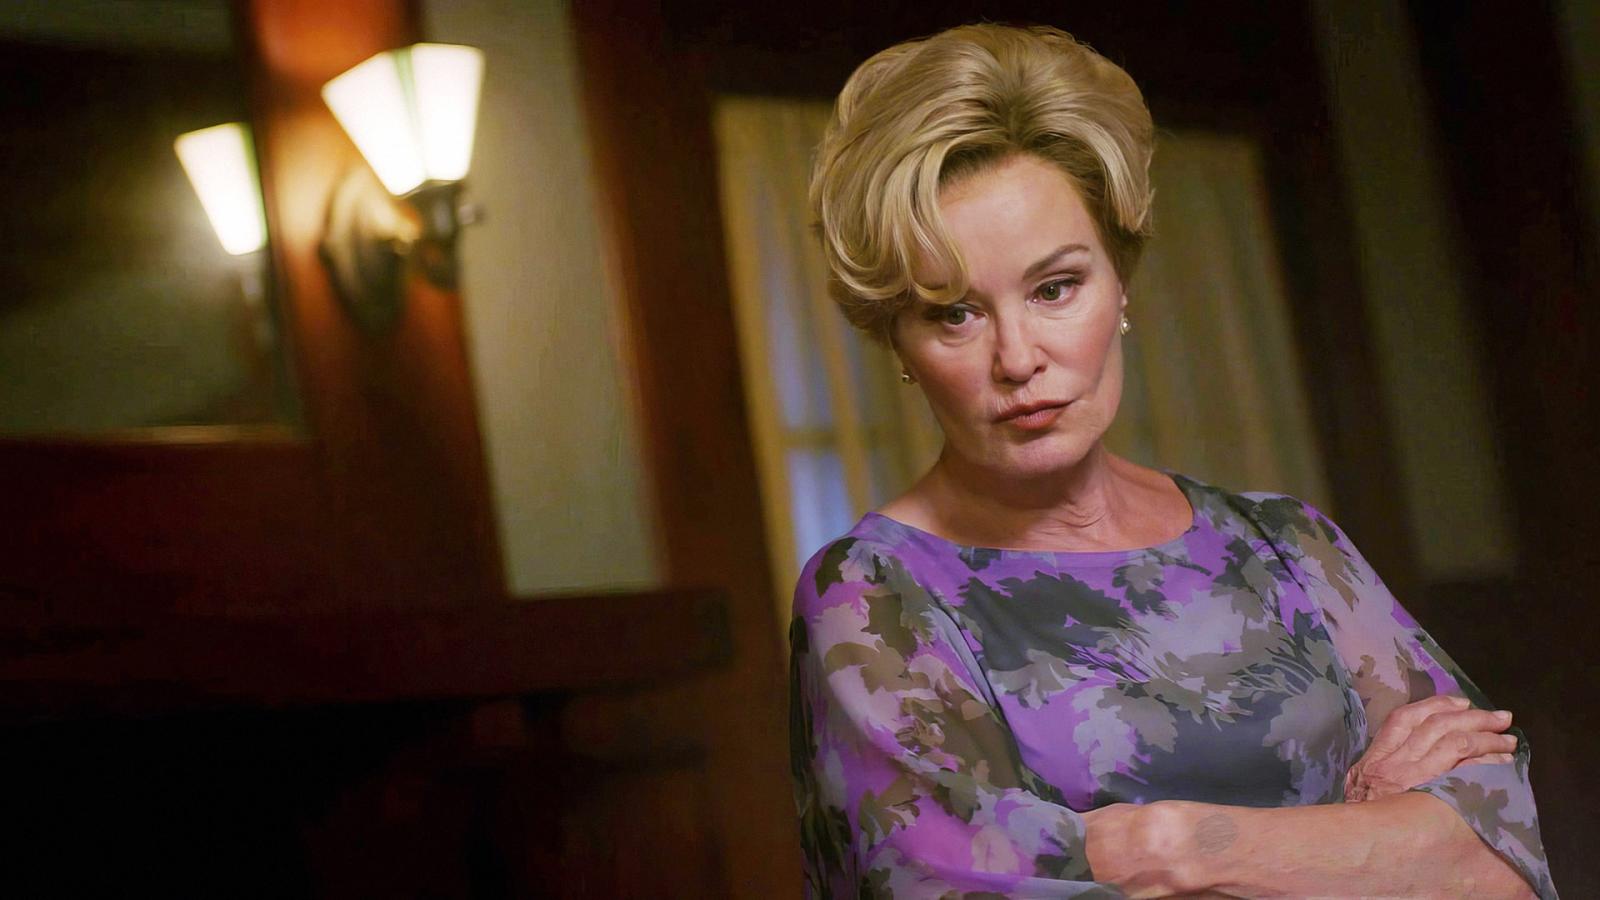 We Ranked Jessica Lange's AHS Roles, And The Winner Will Surprise You - image 3